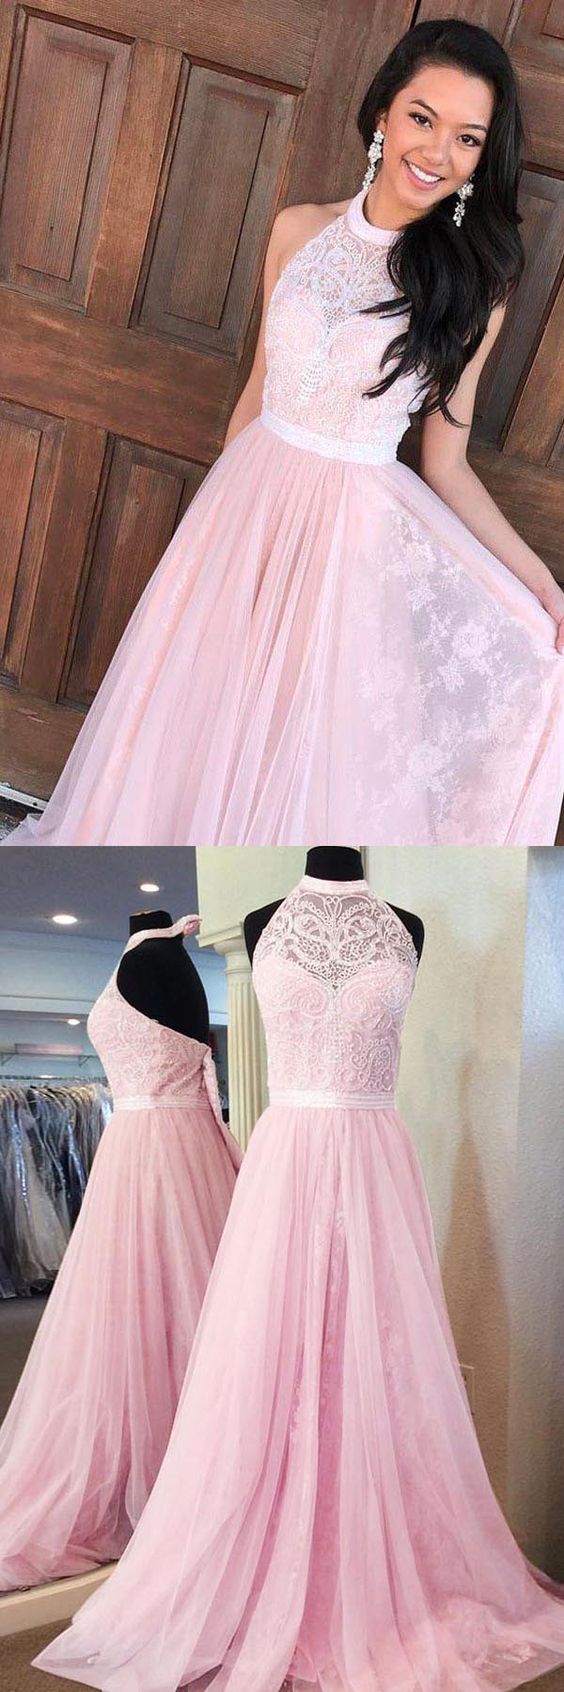 A-line Halter Floor-length Pink Tulle Prom Dresses With Sash Lace M0316